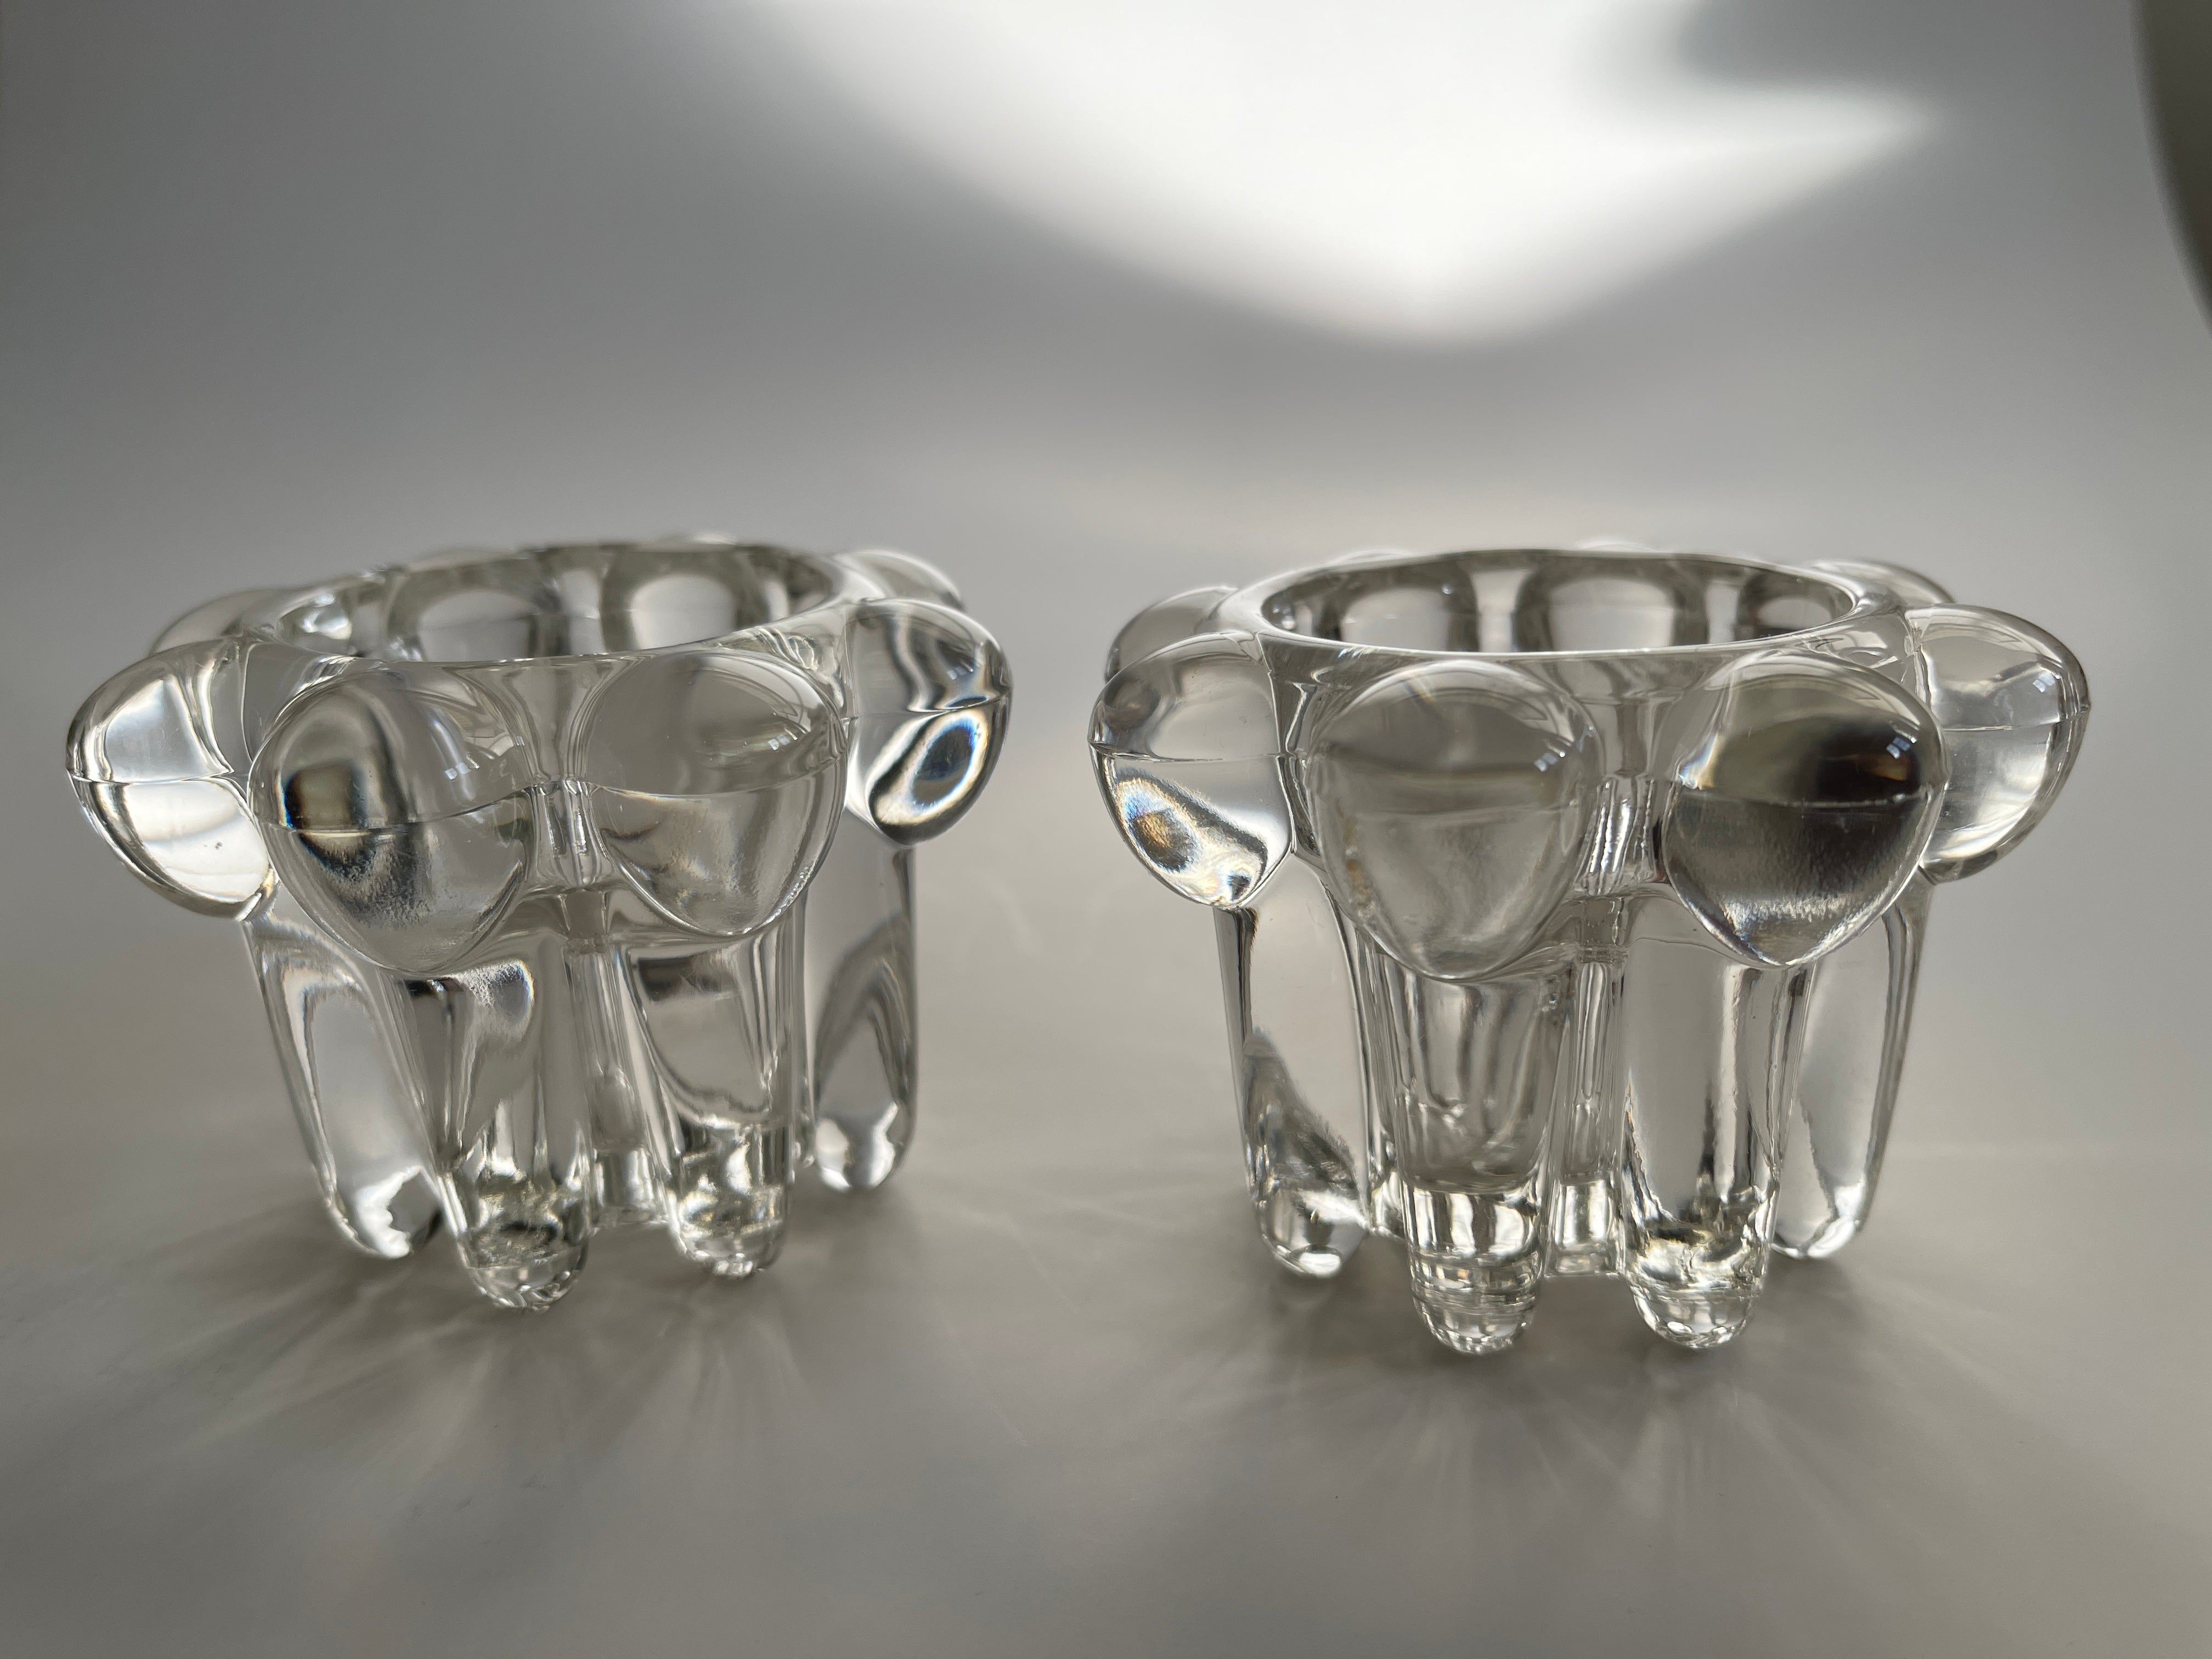 Pair of vintage Swedish glass curved flower candle holders. Beautiful light catching sculptures by day, and gorgeous illuminating the room by night.
May be used with votive candles or candlesticks, they are designed to fit both.